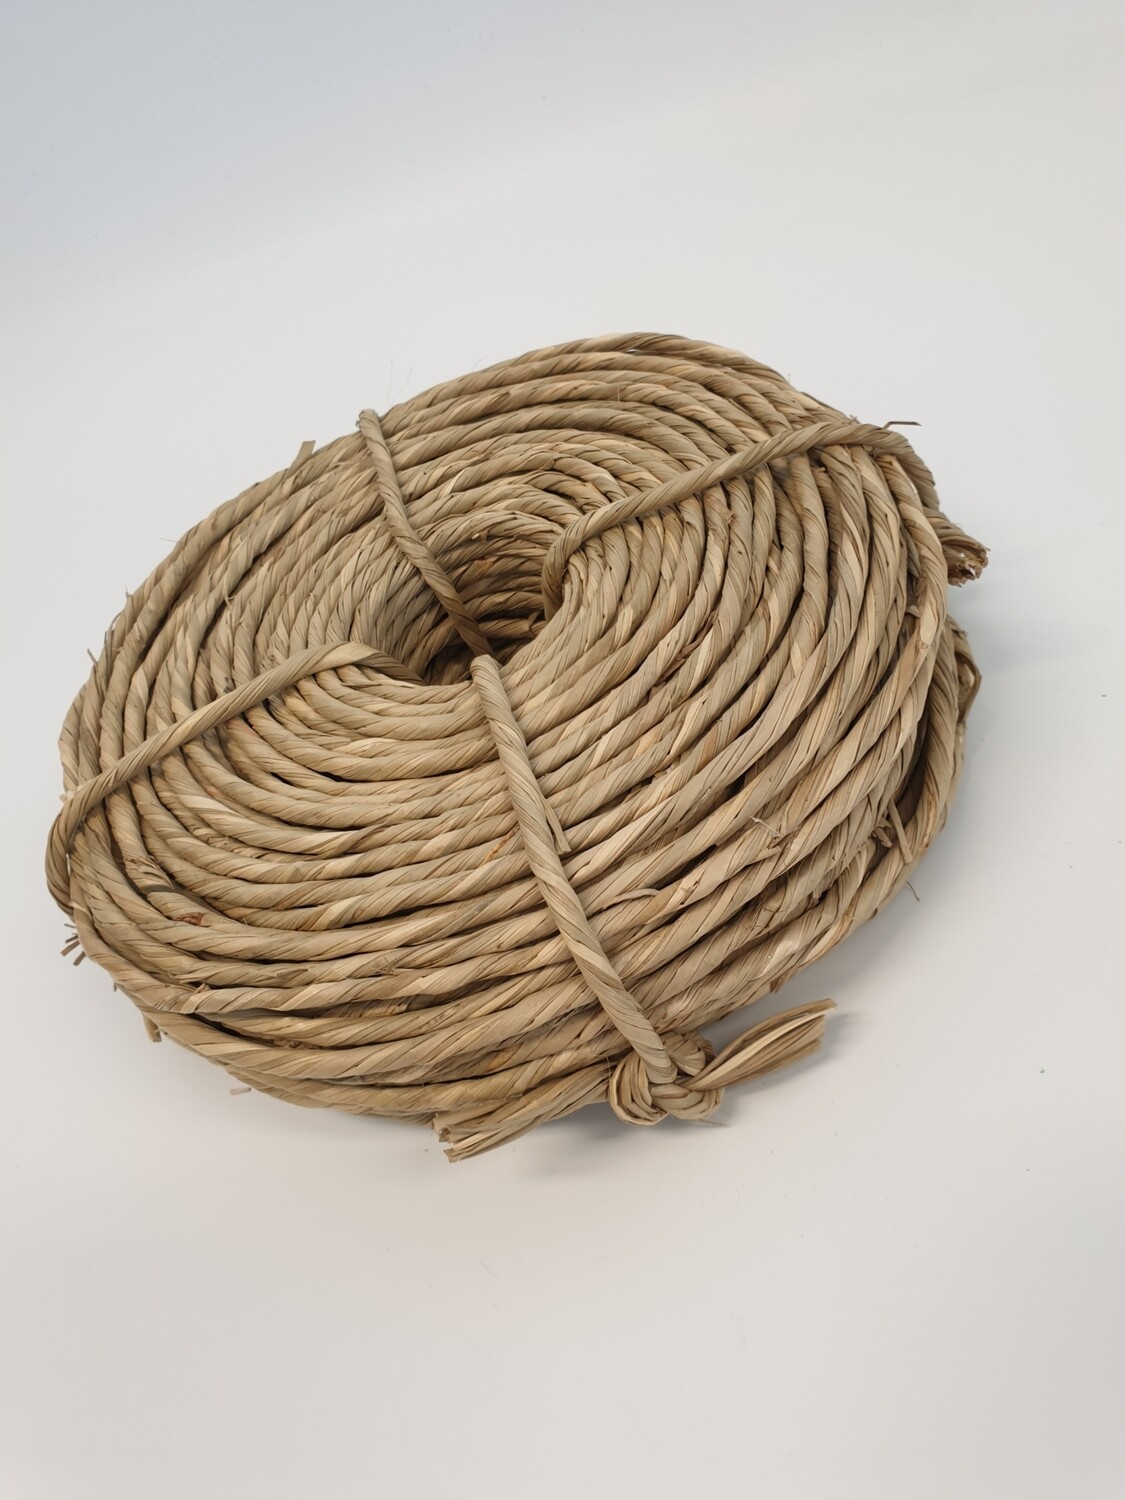 Seagrass cord 1-ply hand twisted 4-5 mm